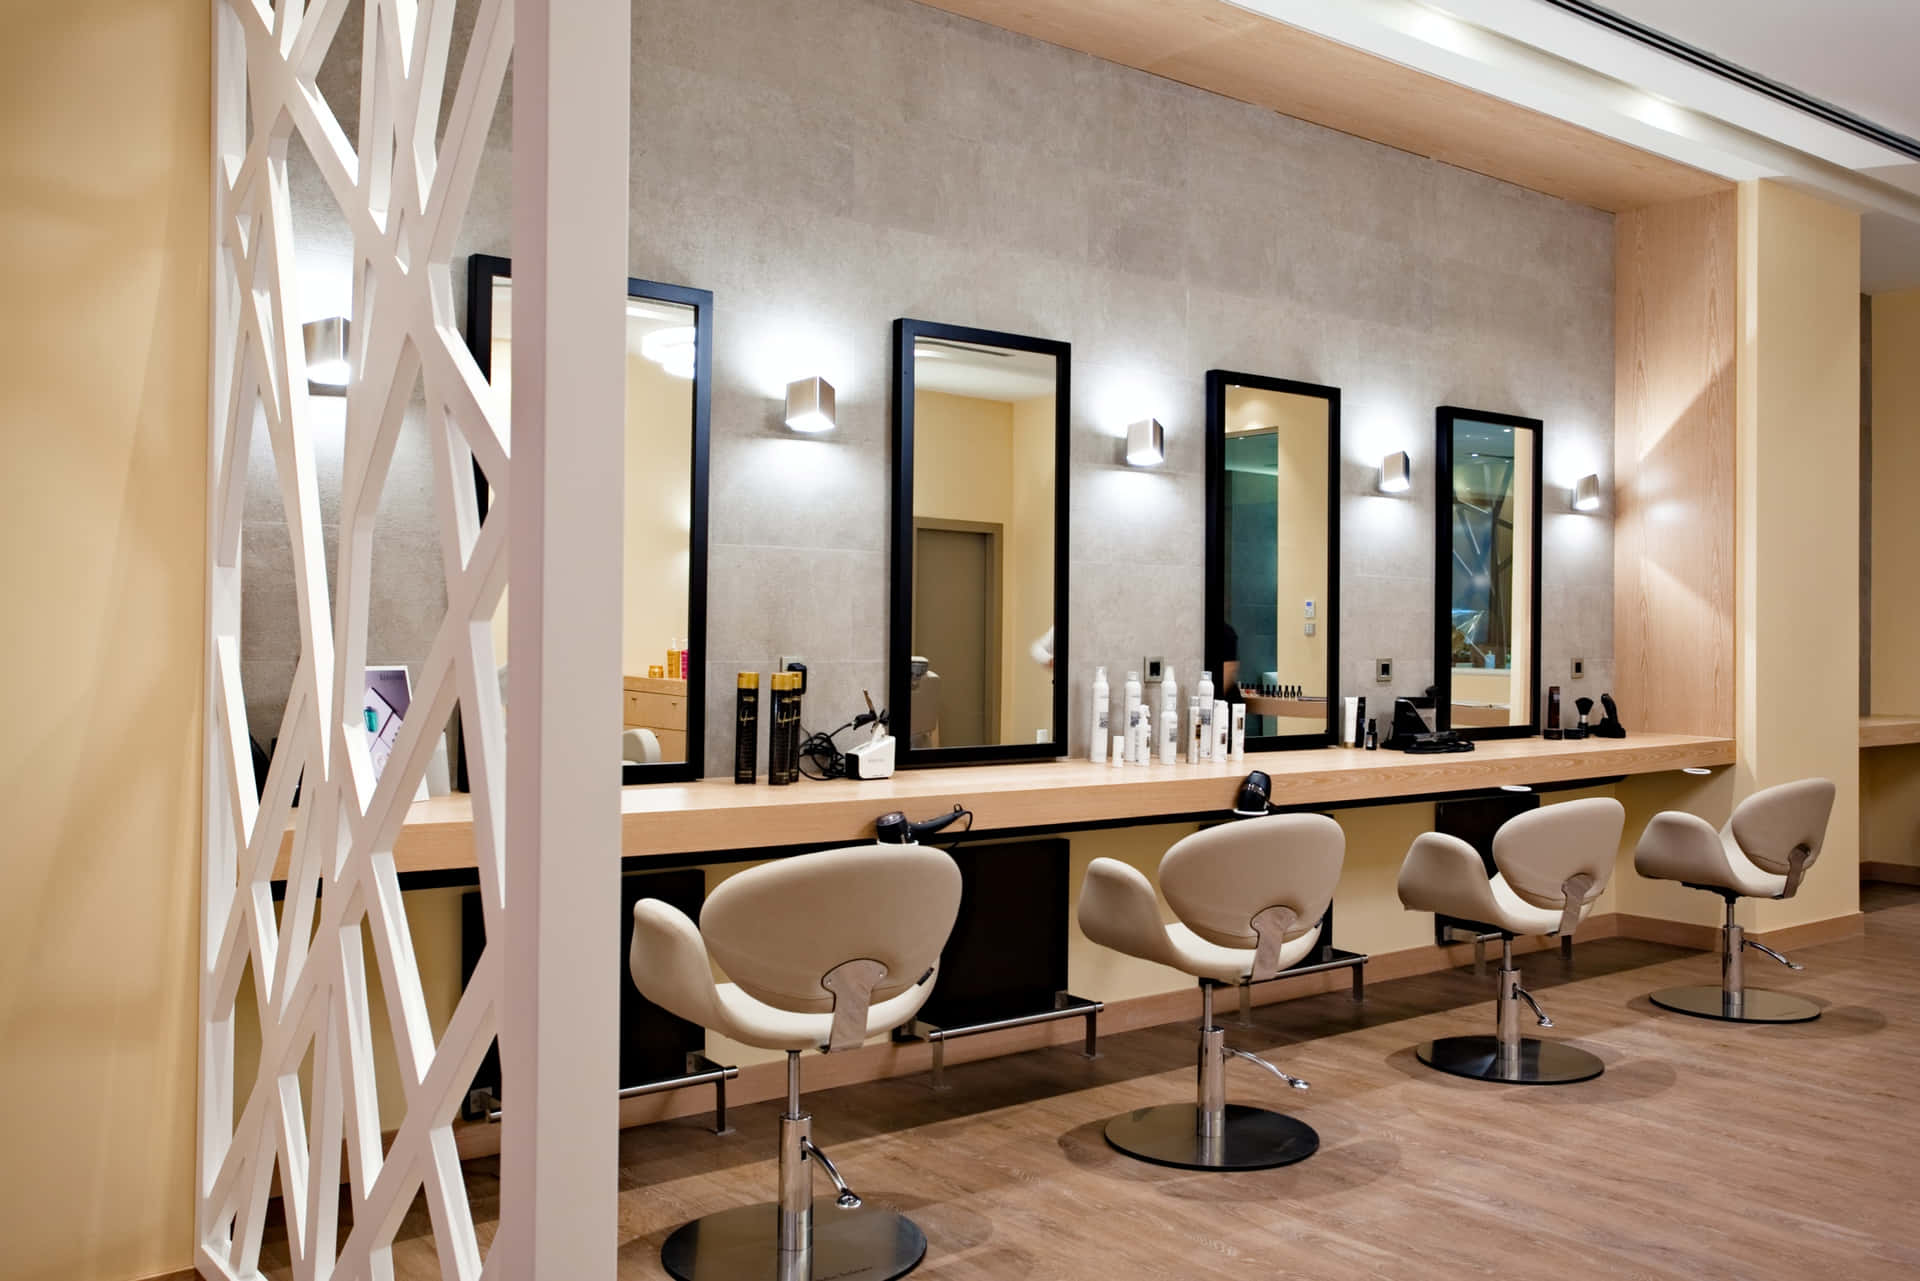 Refresh and Revive your Look with a Hair Styling Session